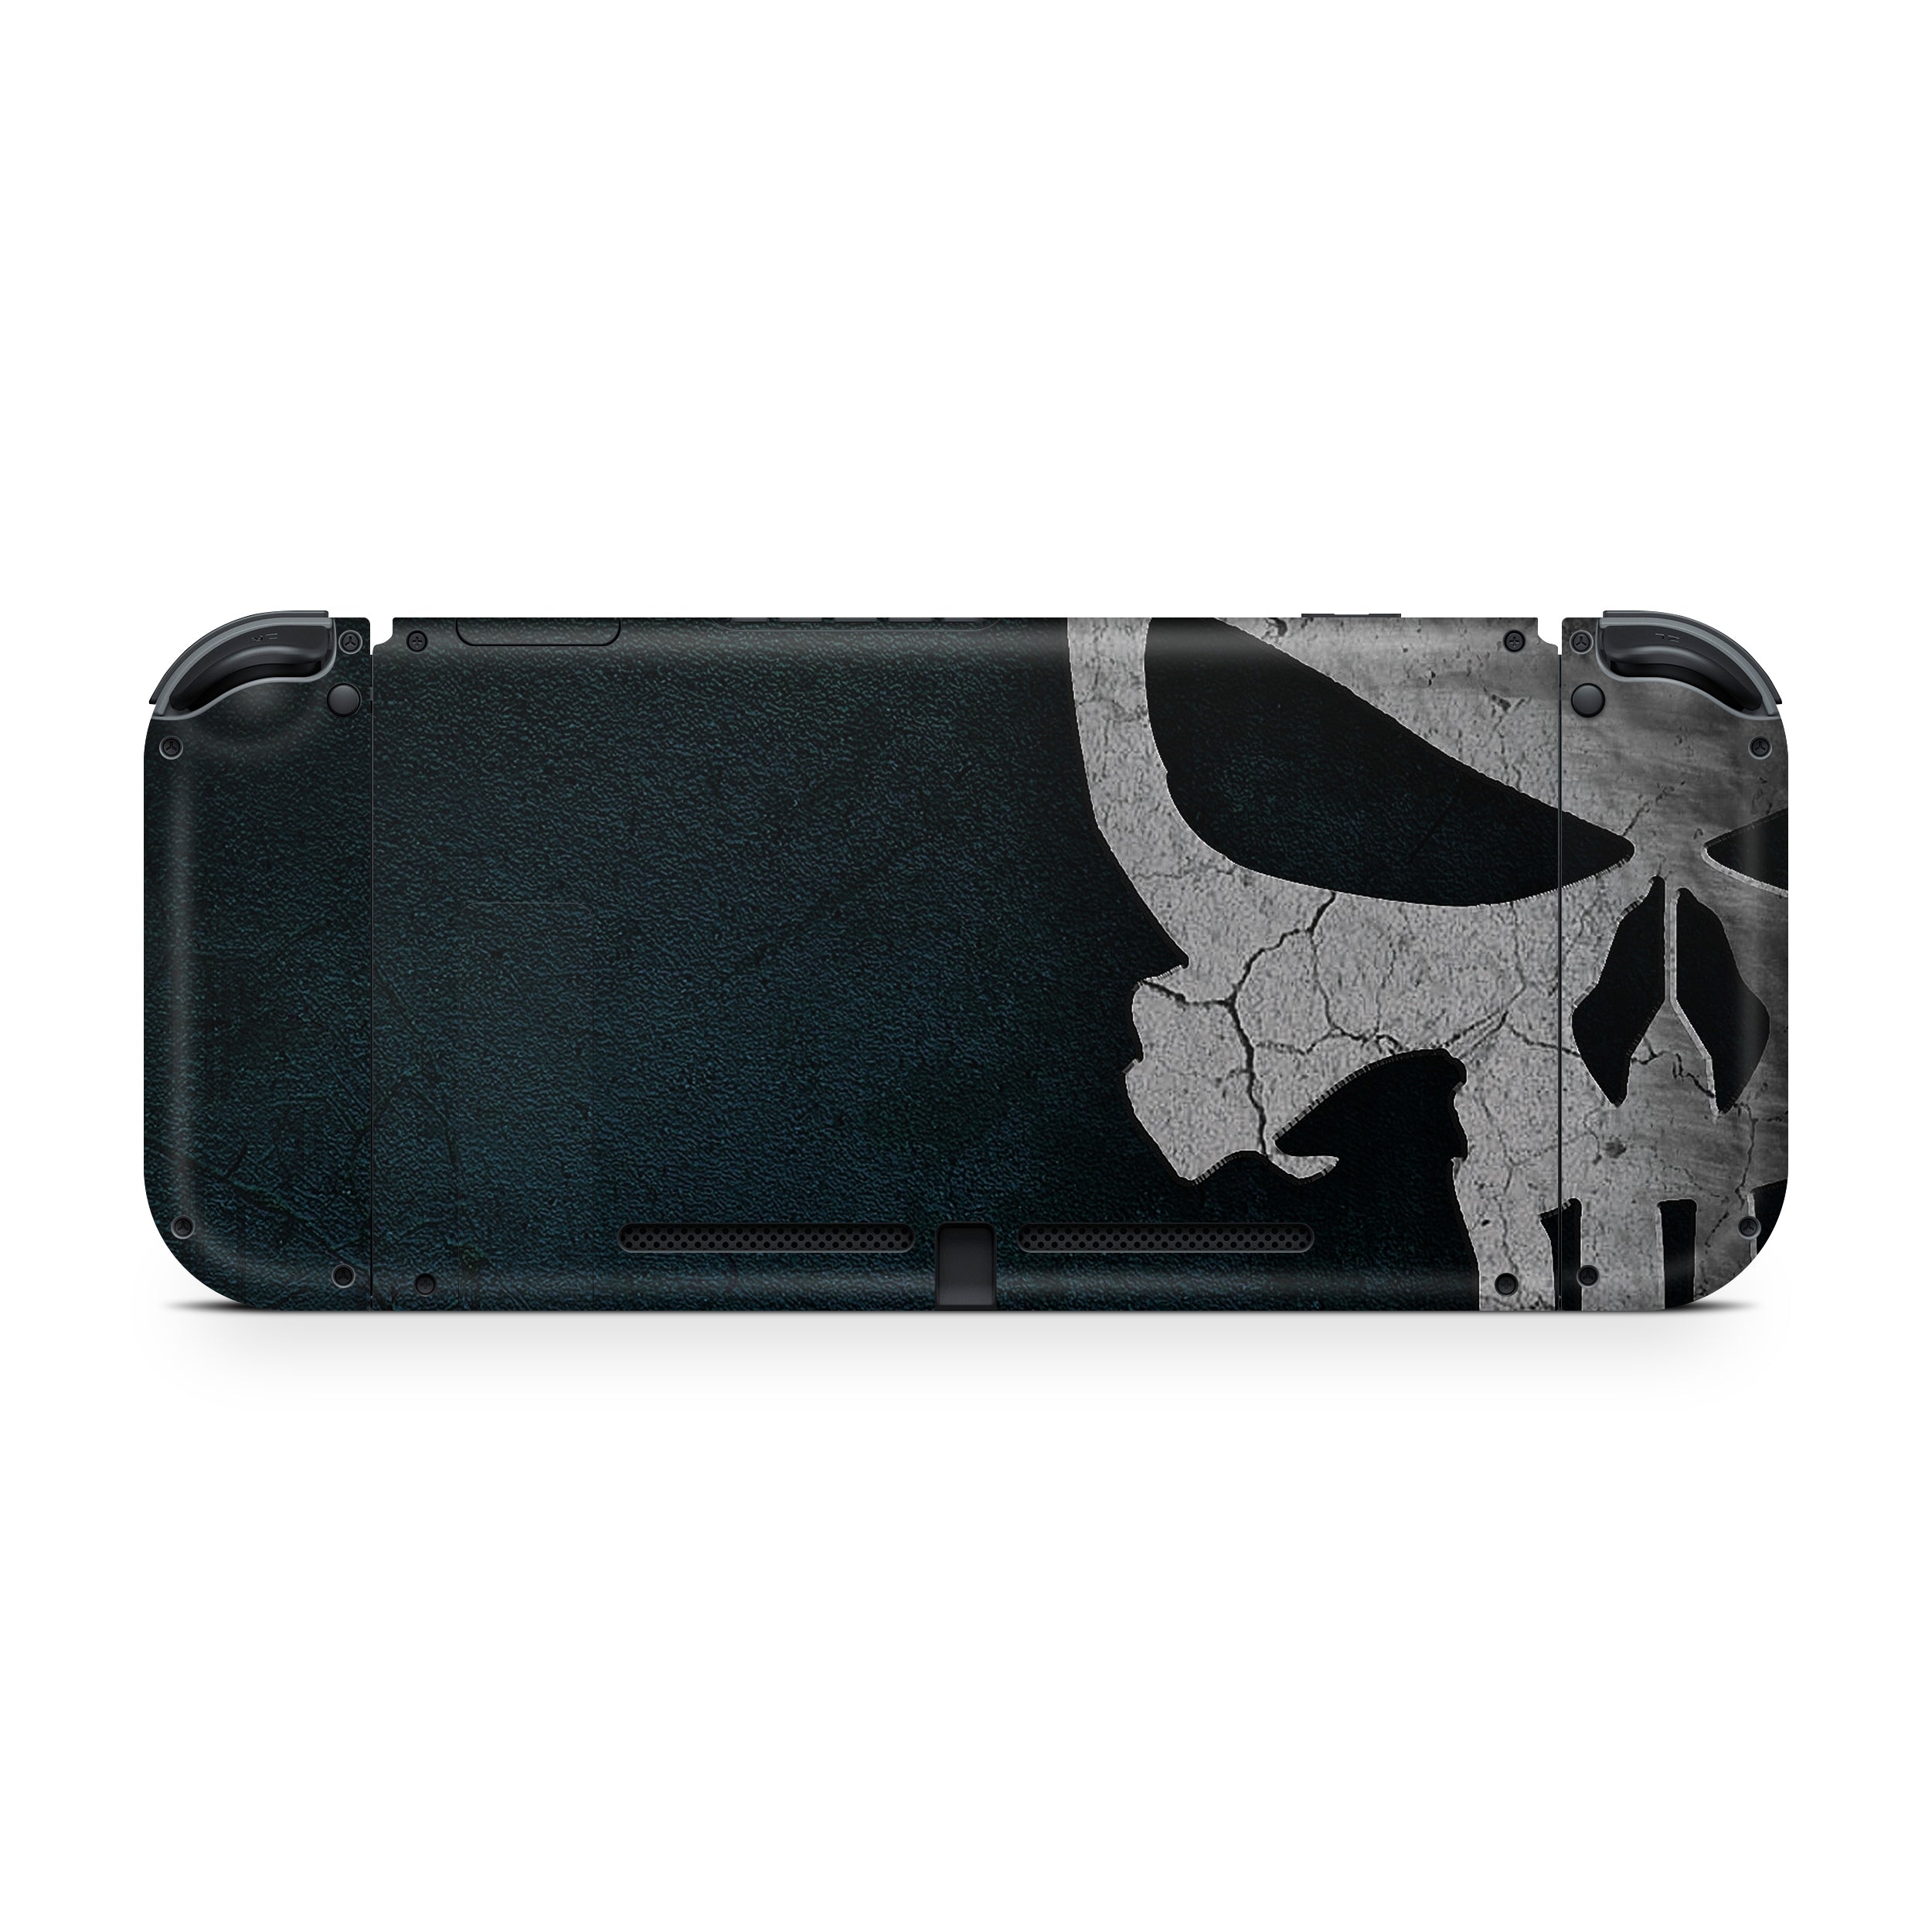 A video game skin featuring a Marvel The Punisher design for the Nintendo Switch.